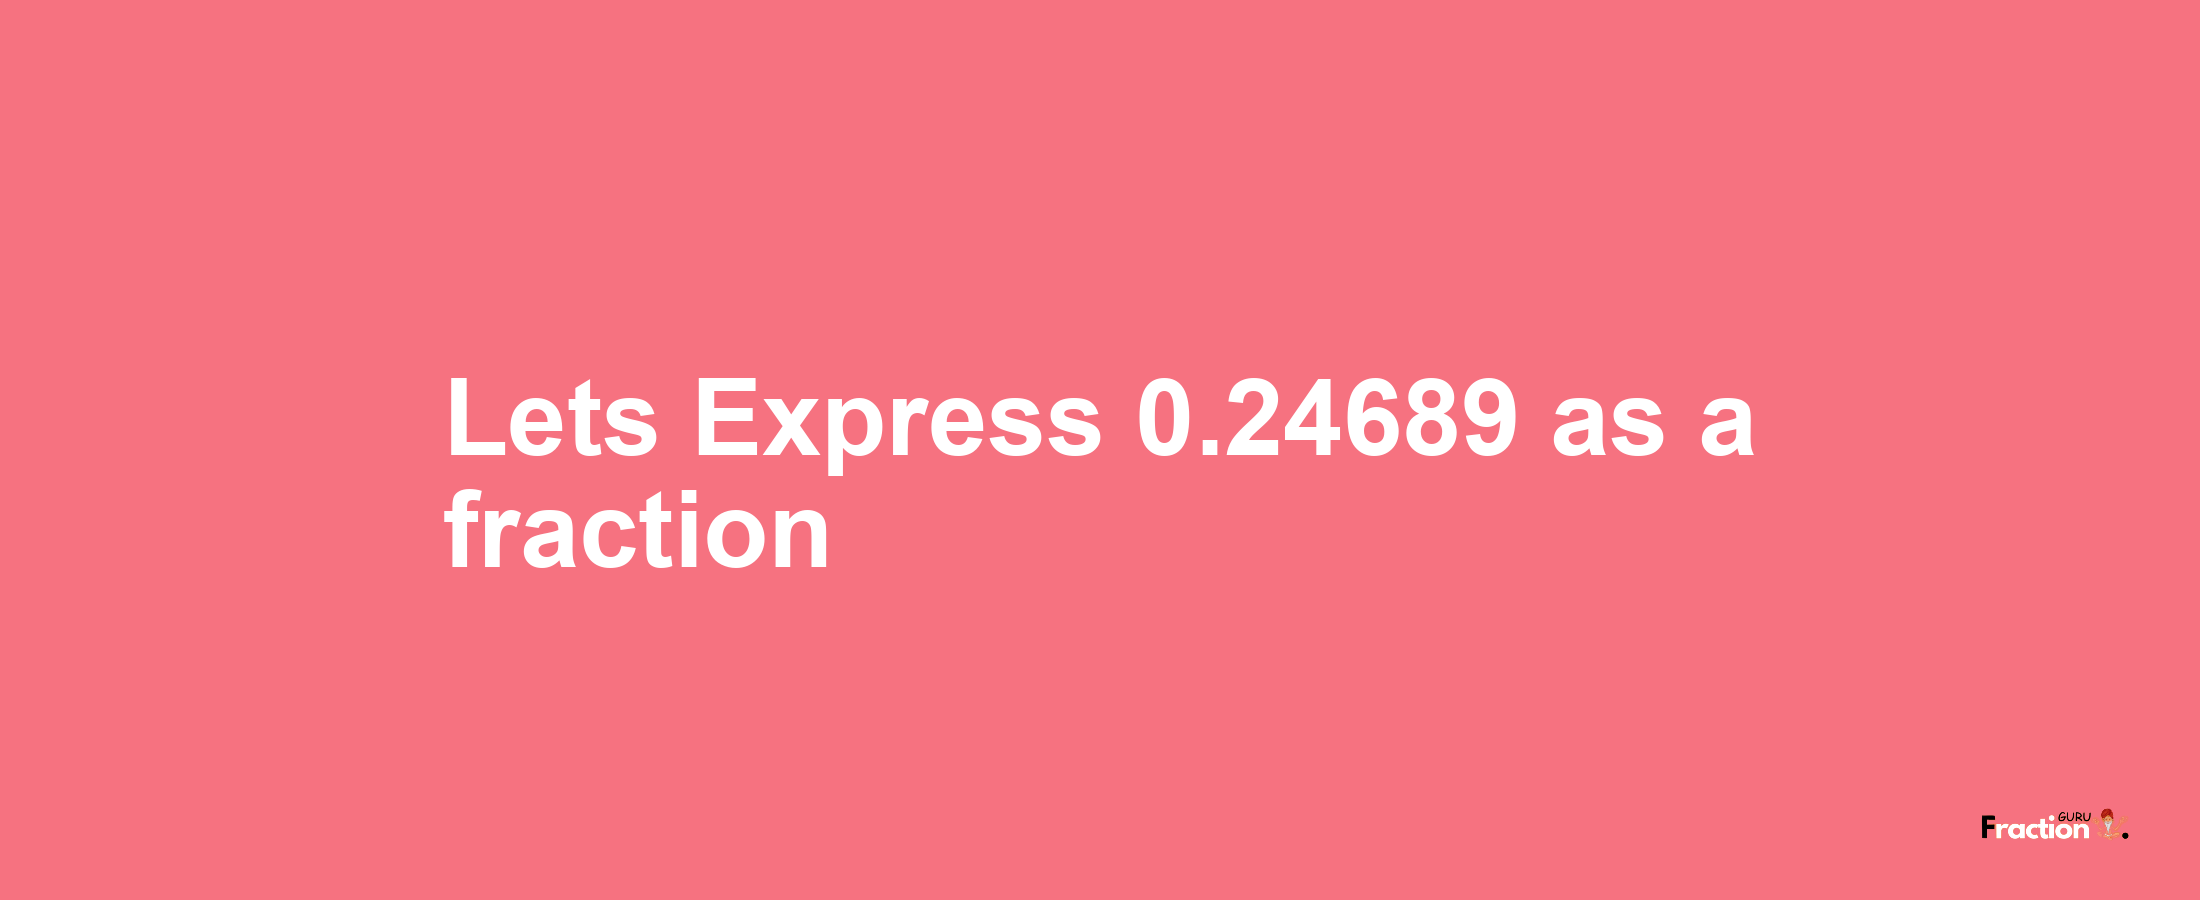 Lets Express 0.24689 as afraction